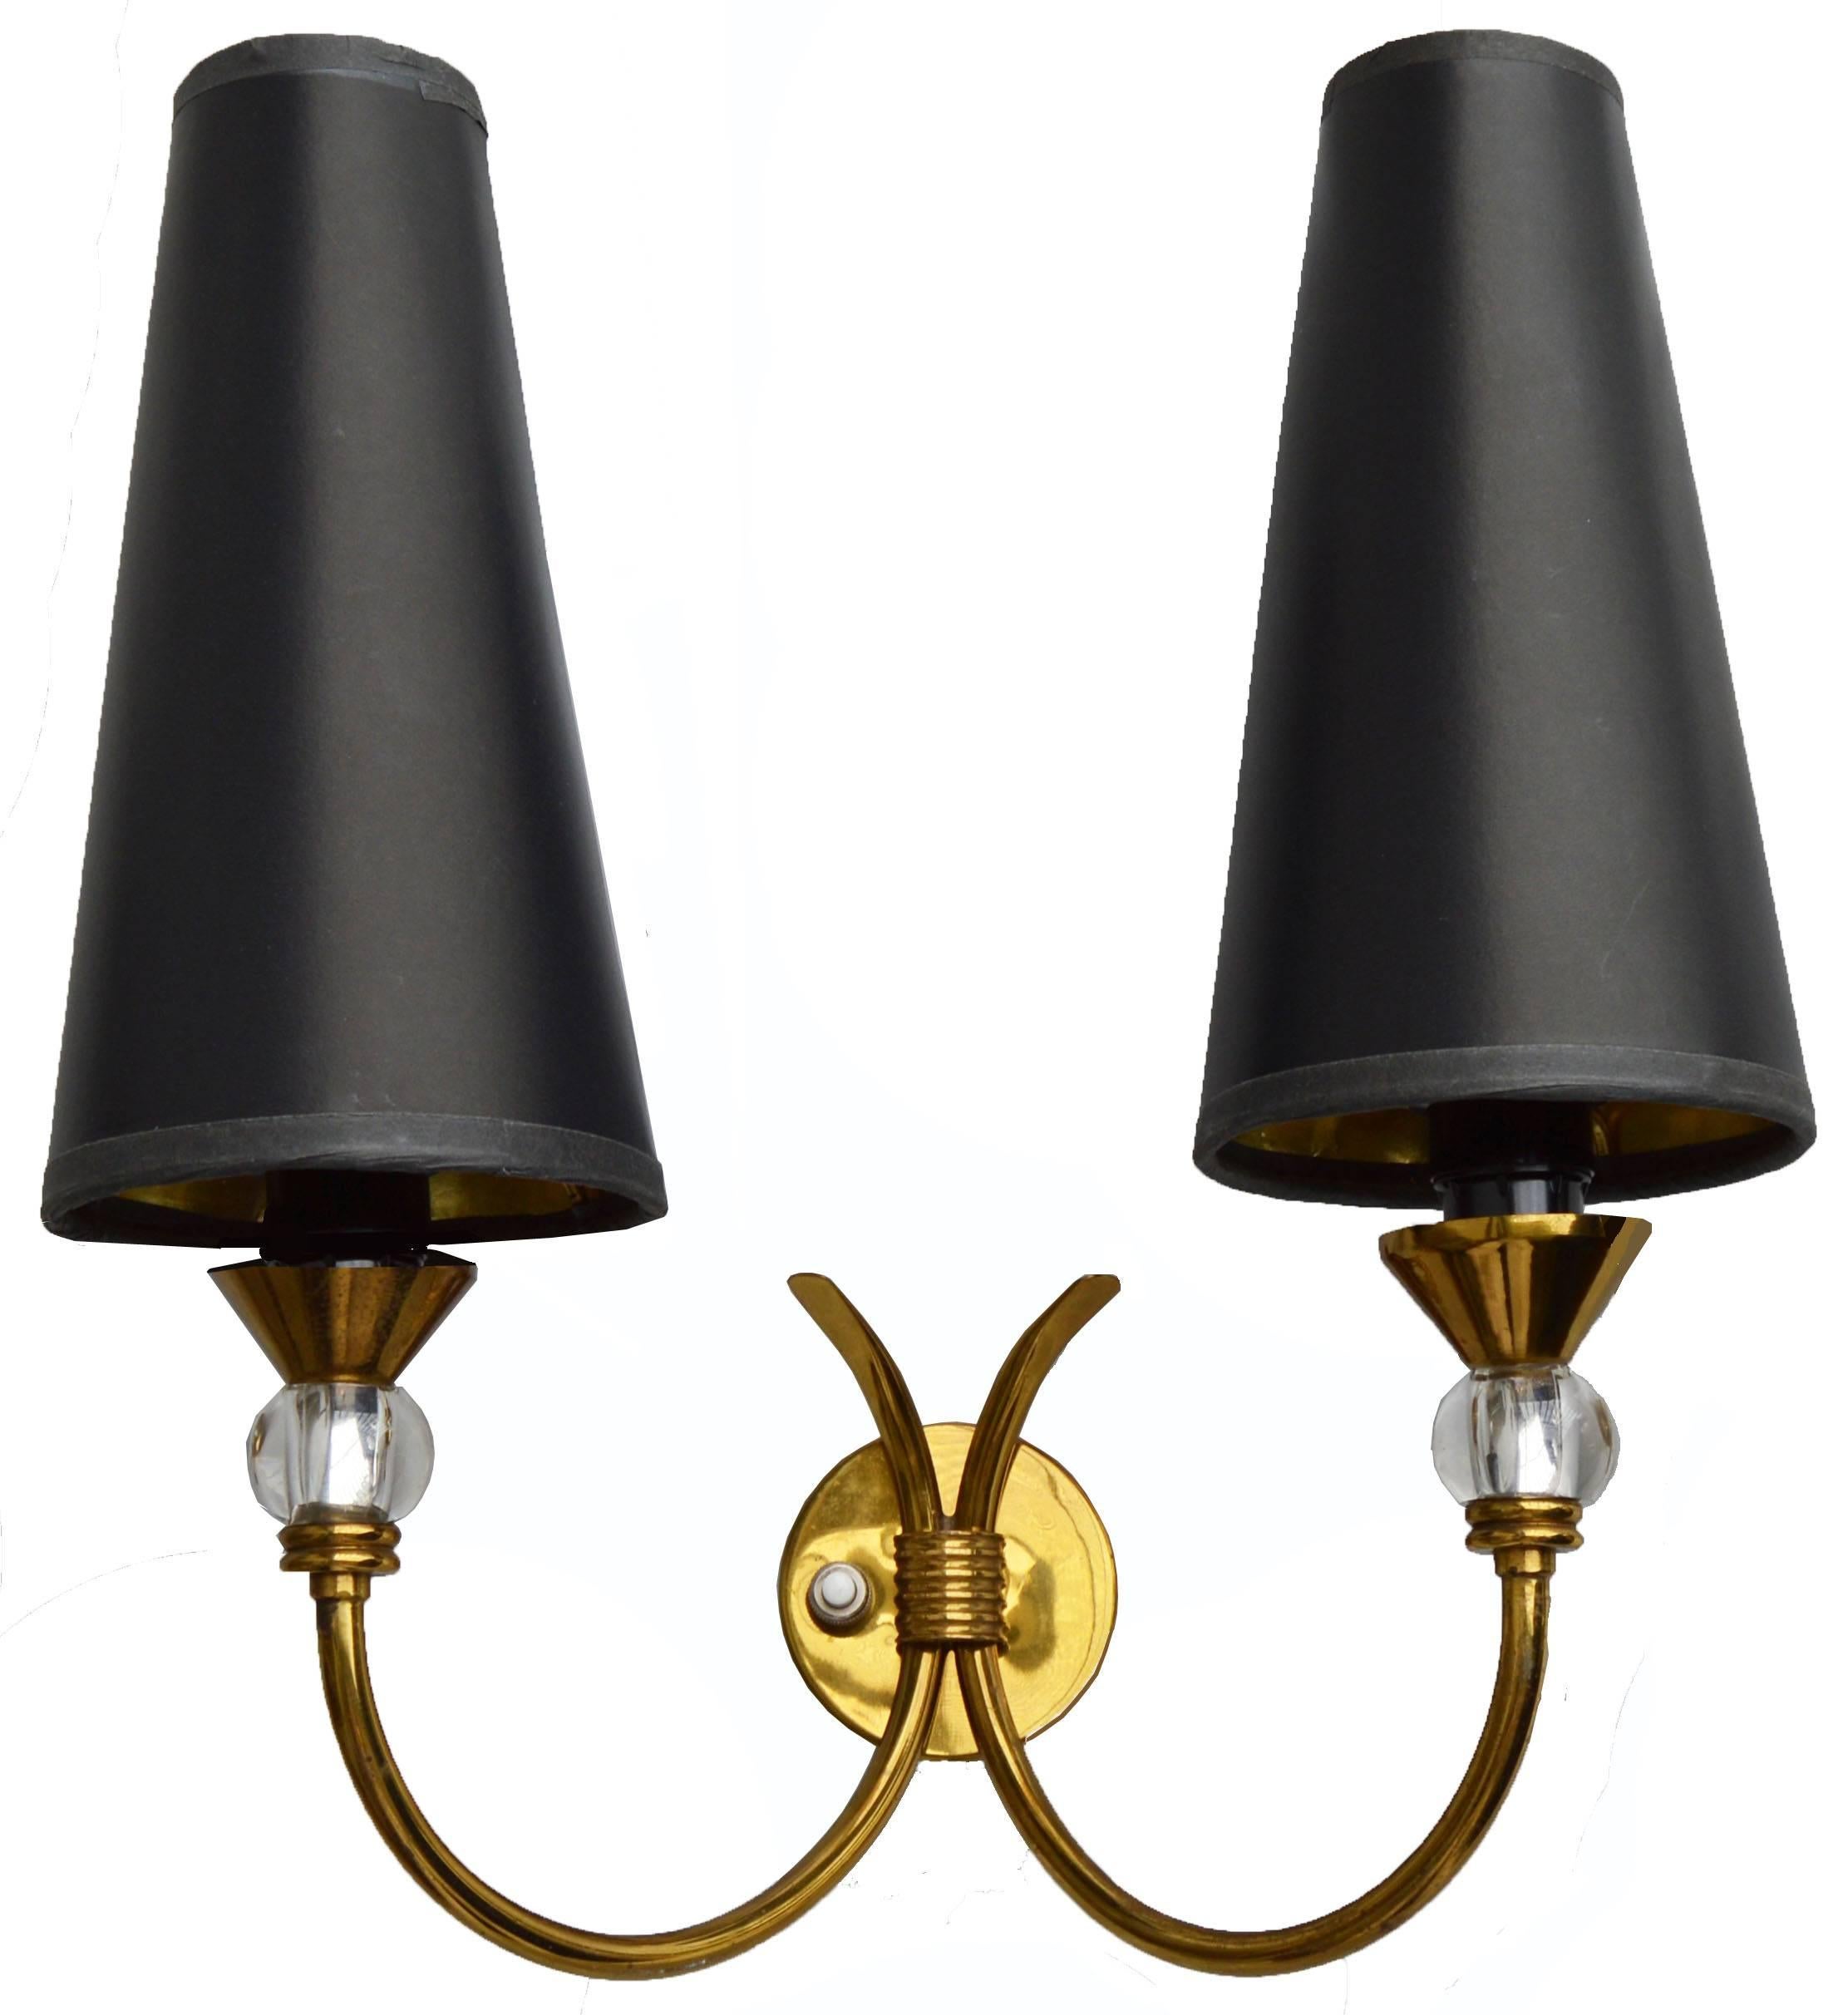 Maison Lunel Pair of Sconces In Excellent Condition For Sale In Miami, FL